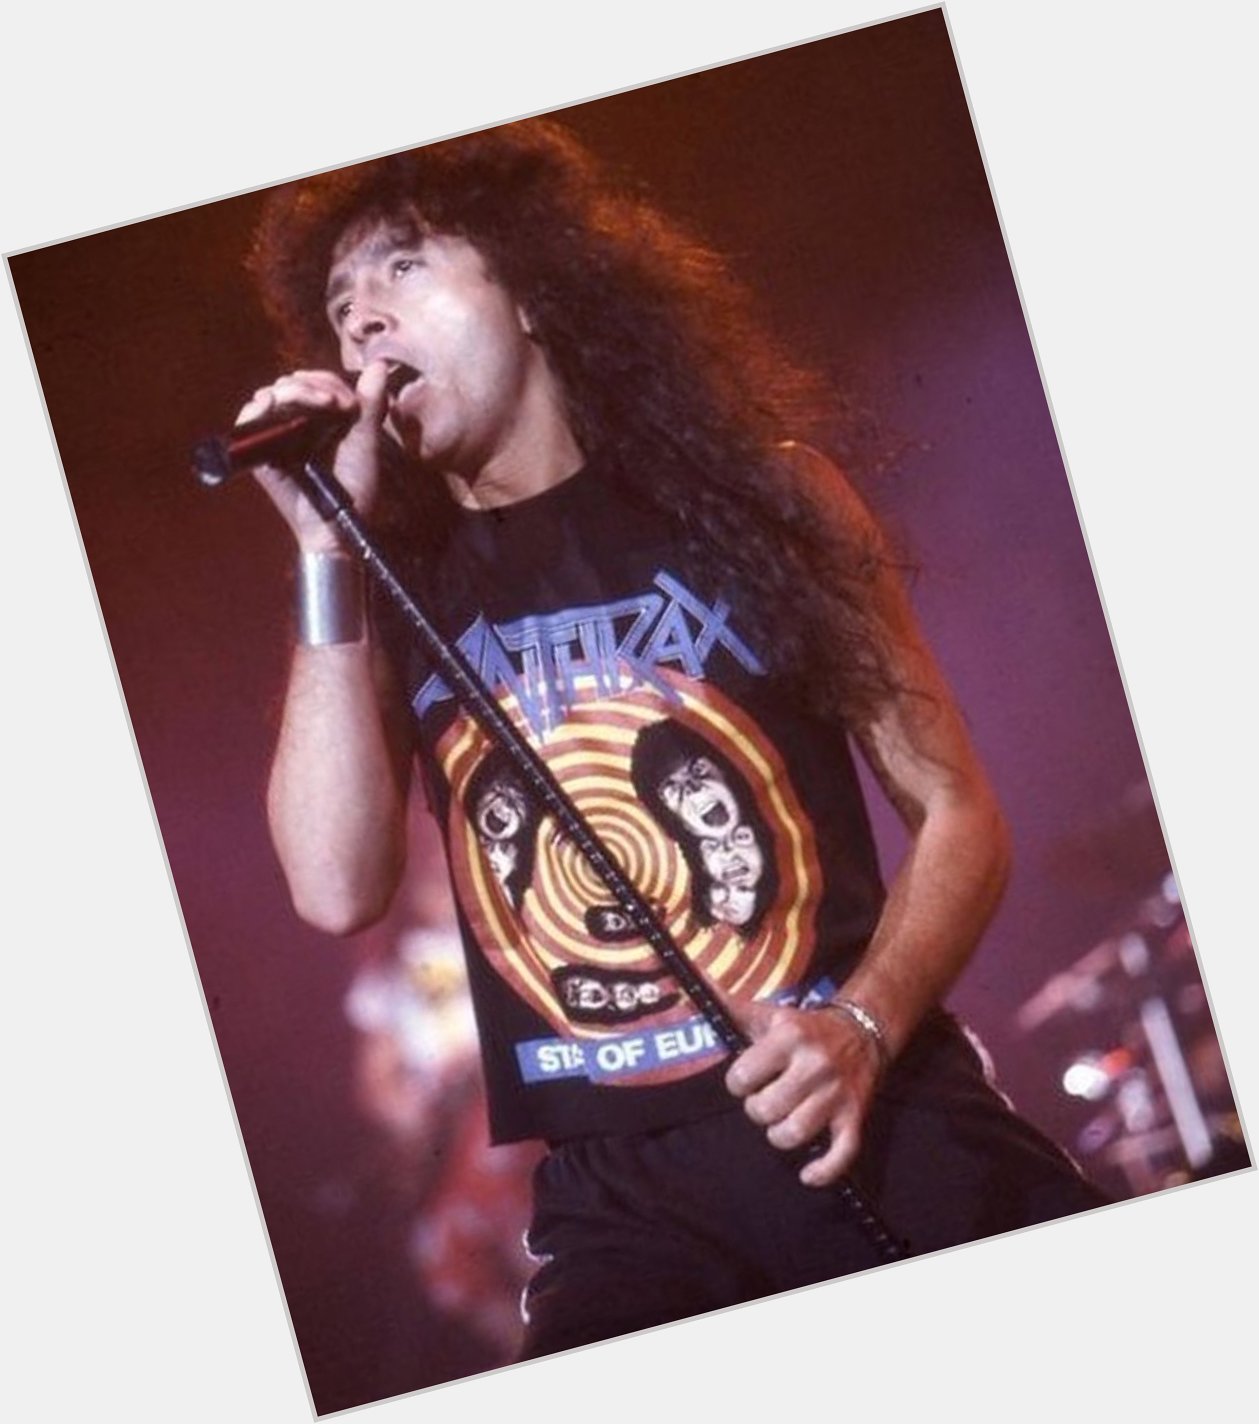 A huge Happy Birthday to the one and only Joey Belladonna  